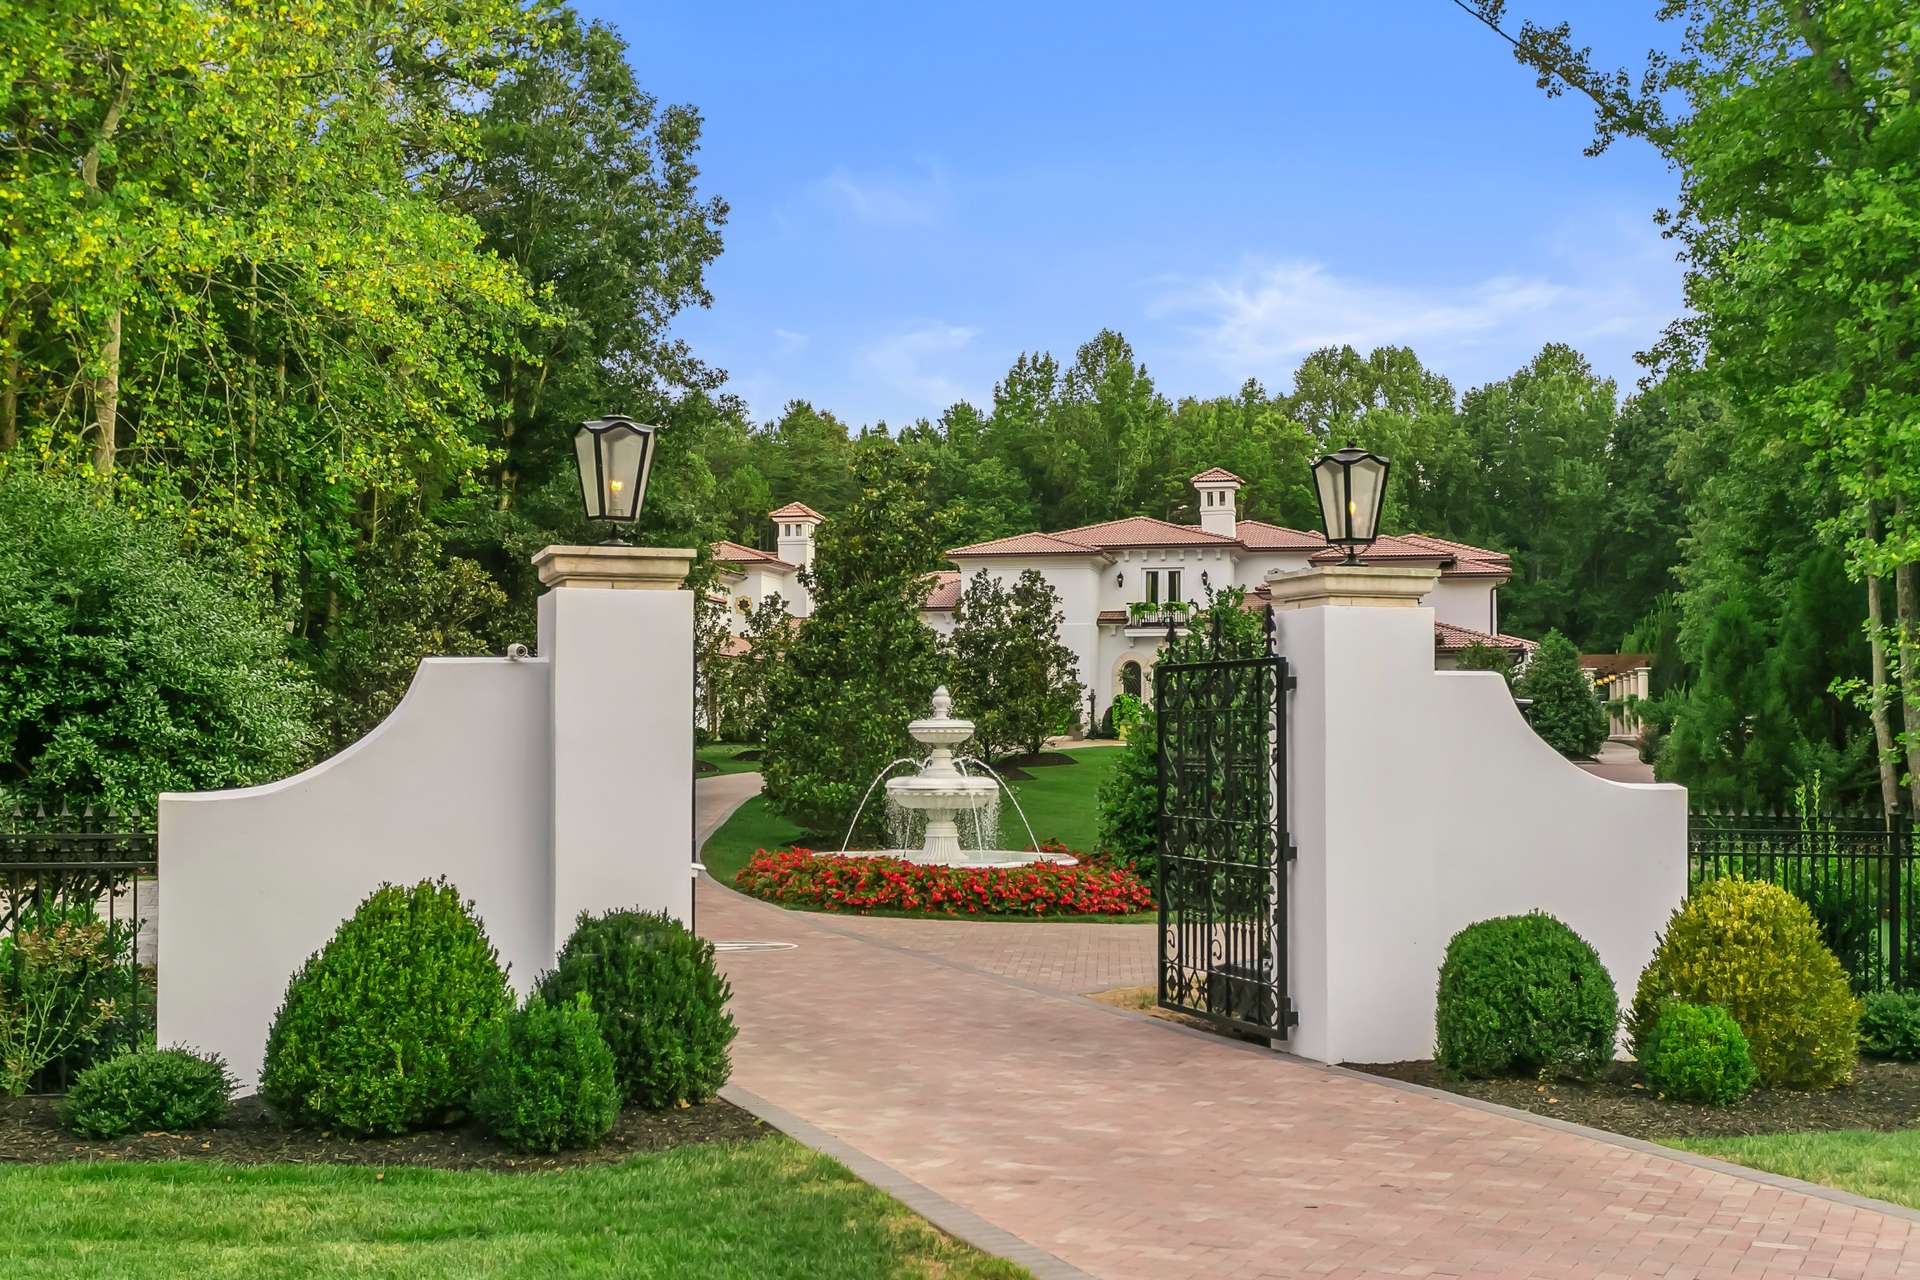 8371 Providence Road, Charlotte, NC, A luxury Mediterranean-style, Mizner-inspired property. Presented by Liza Caminiti, Senior Broker-in-Charge at Ivester Jackson | Christie’s International Real Estate • Buyer's Transactional Attorney: Aaron Lindquist | FINEST RESIDENCES